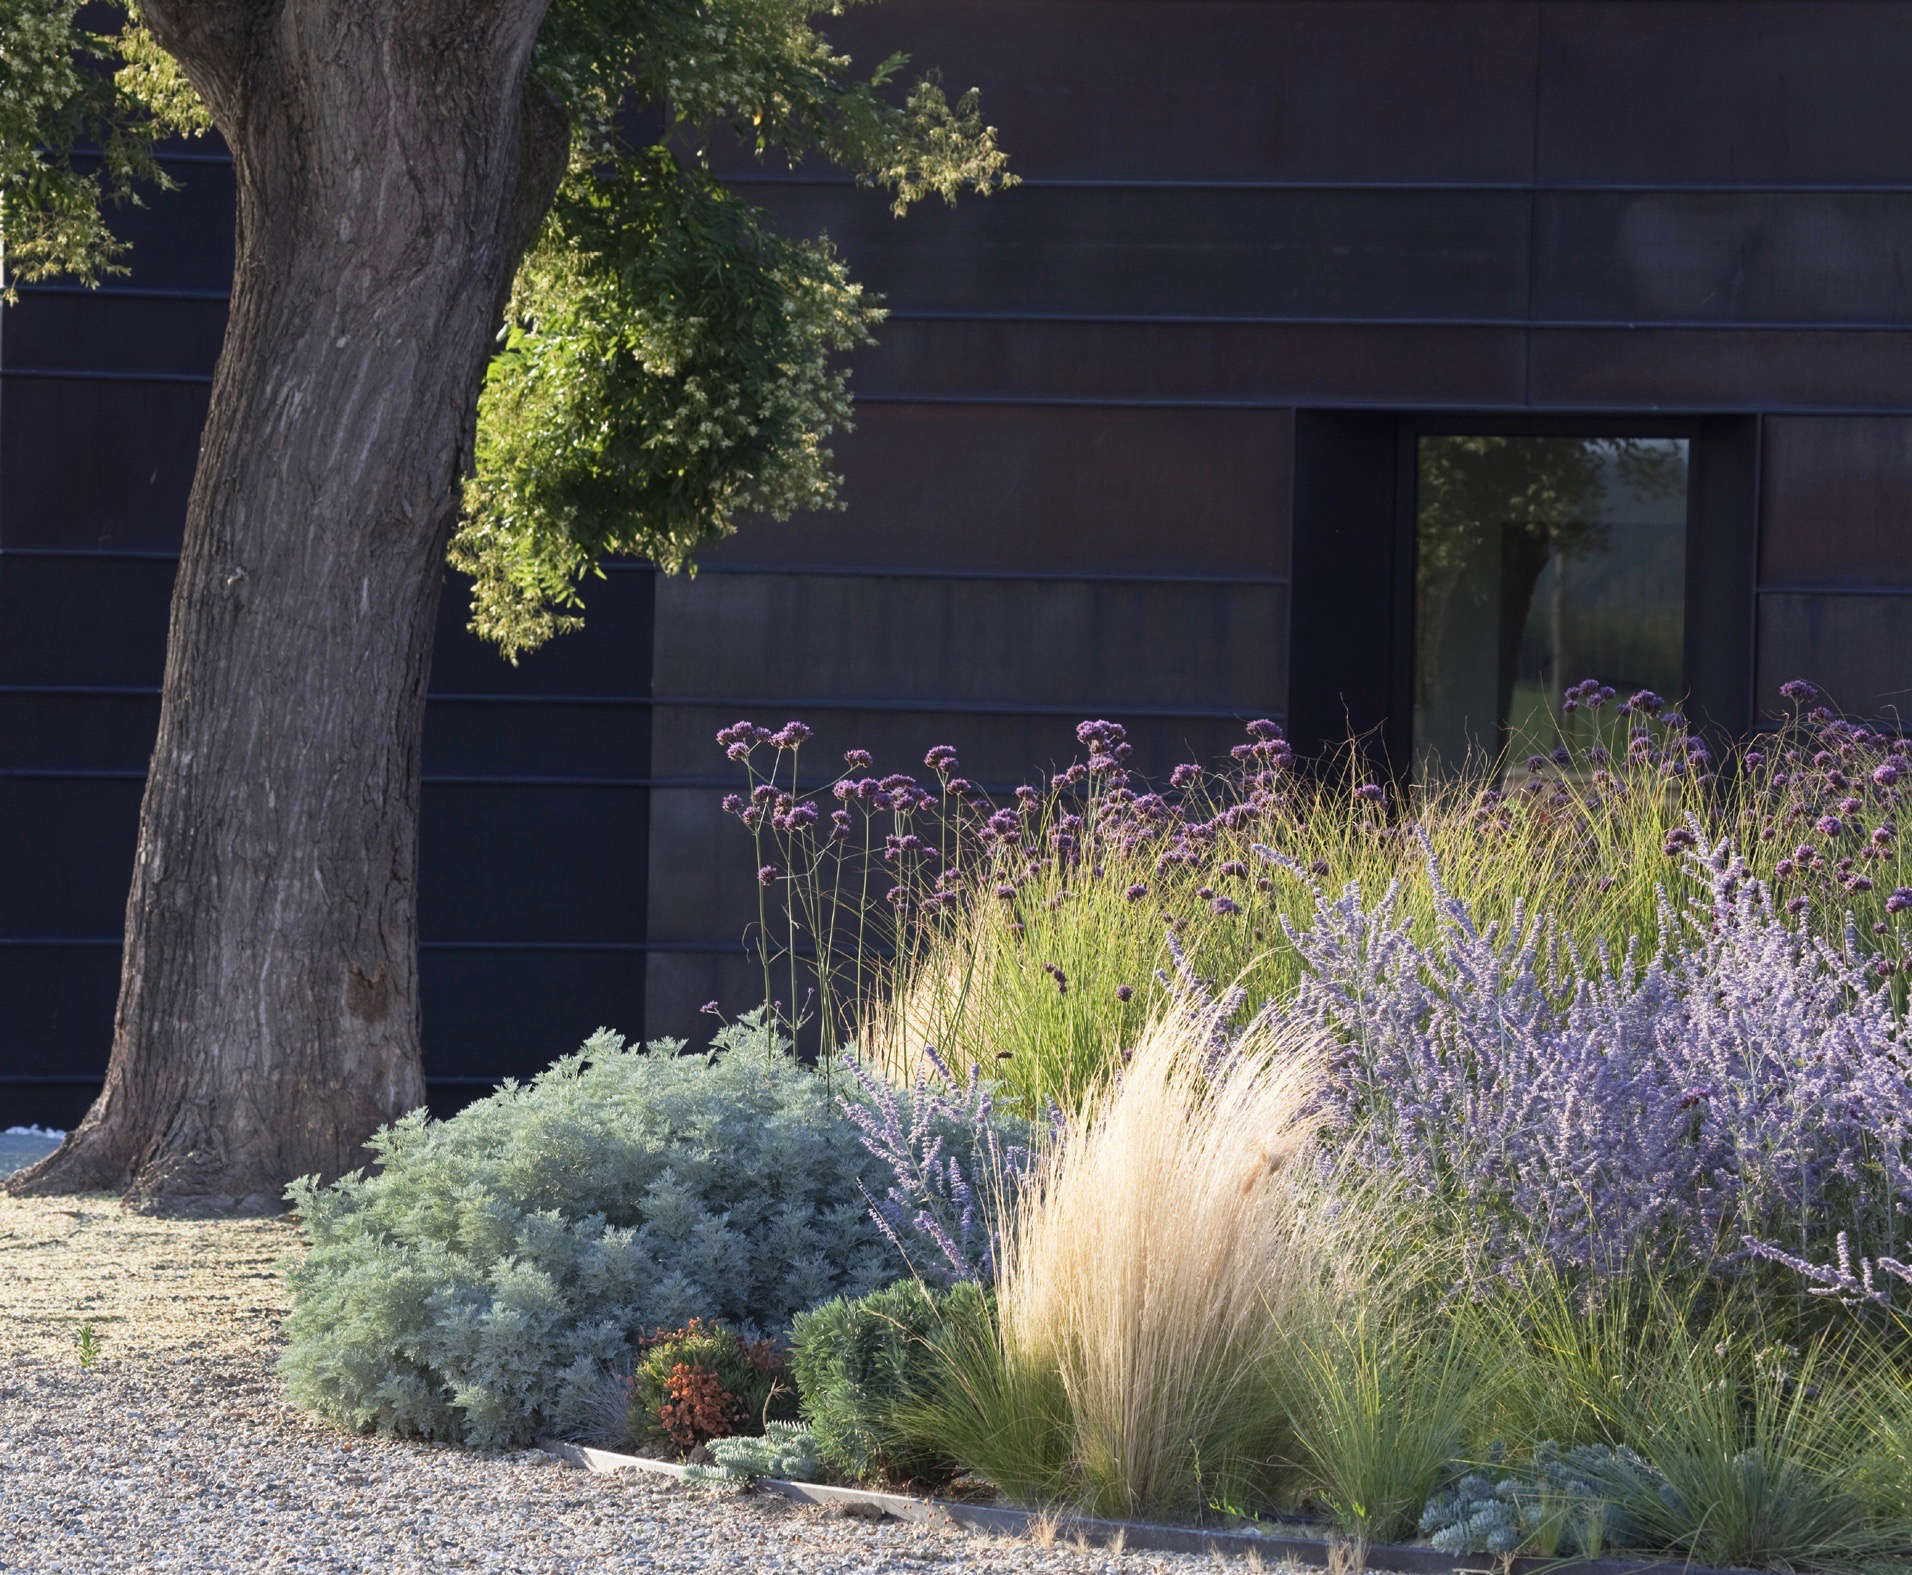 Gossamer Gardens: 11 Ideas for Landscaping with Mexican Feather Grass